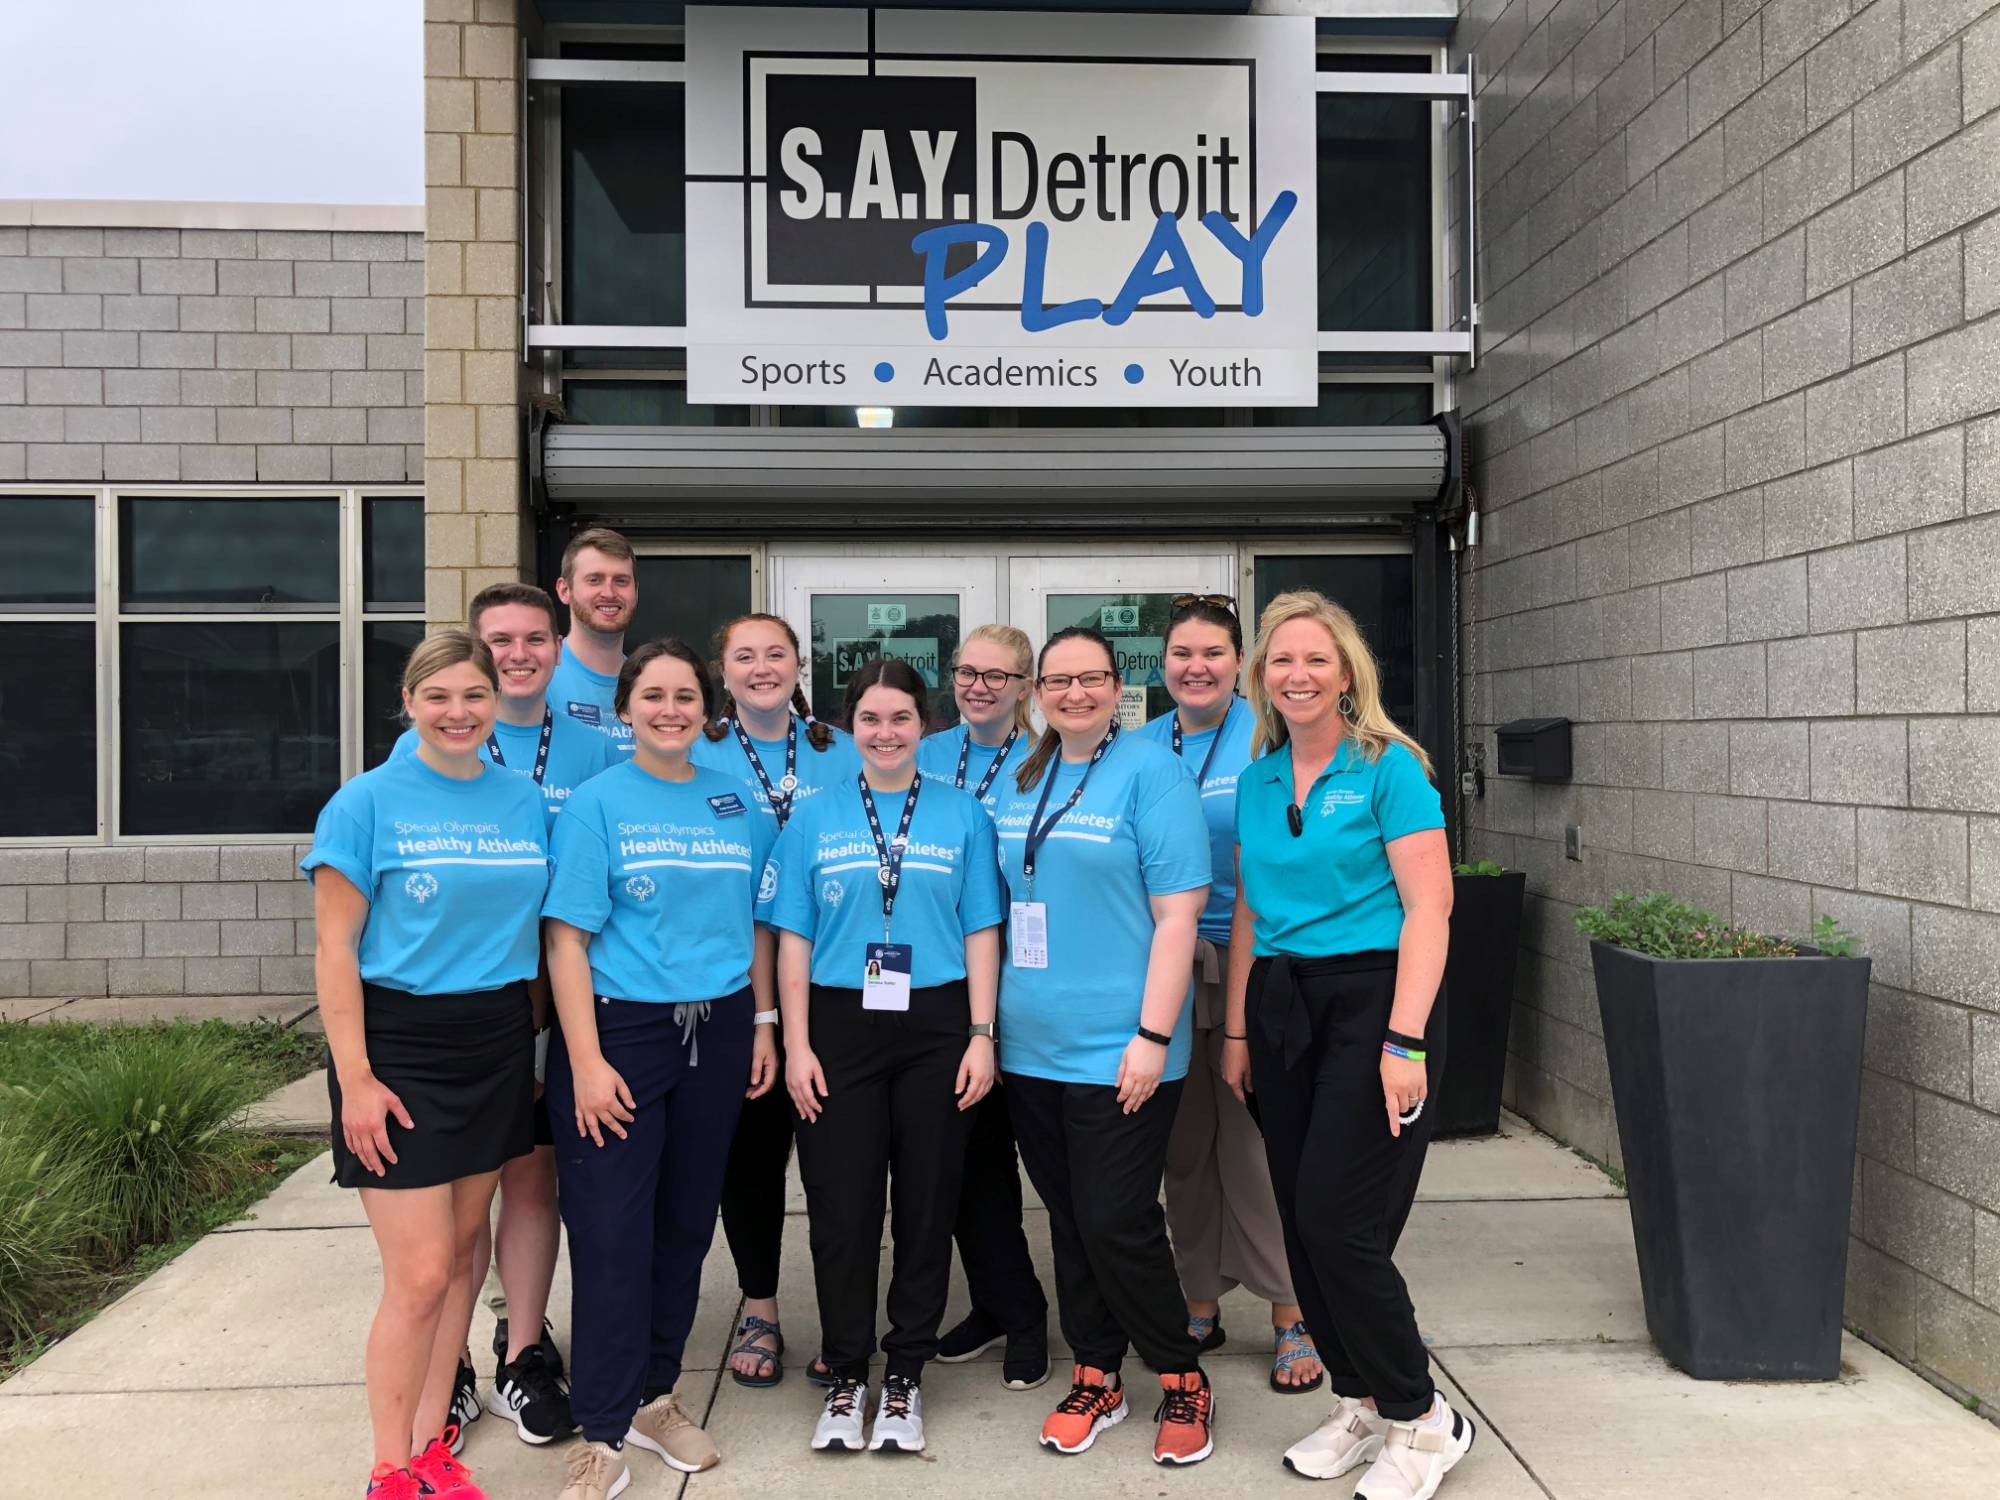 Audiology students, volunteer and faculty at SAY Detroit Play